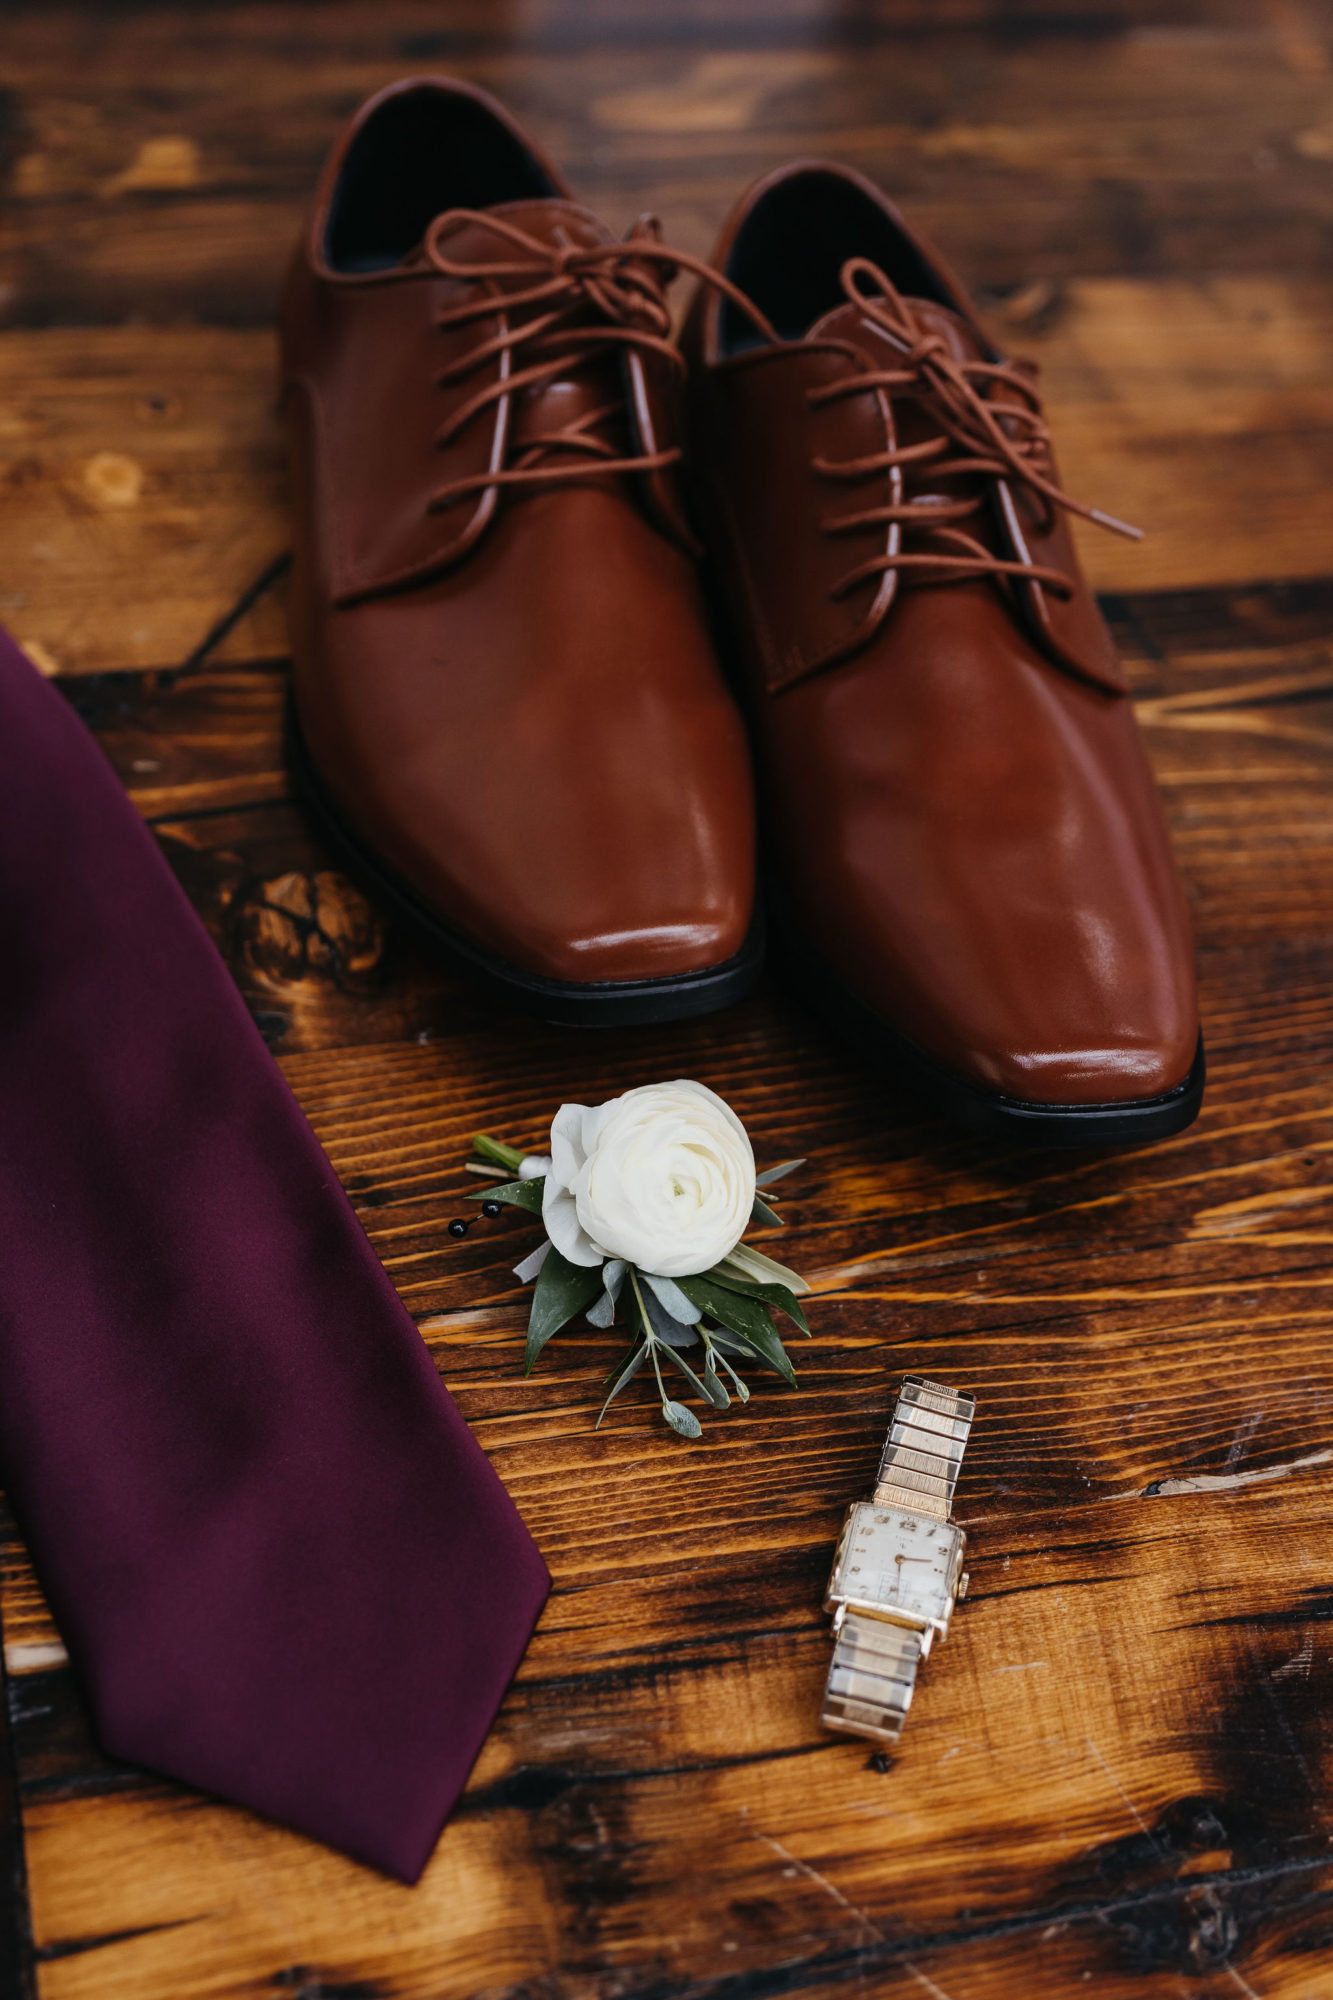 white Boutonnière, fall wedding, burgundy and green wedding, hudson valley wedding photographer, romantic rustic wedding, romantic fall wedding, wedding shoes, groom wedding shoes